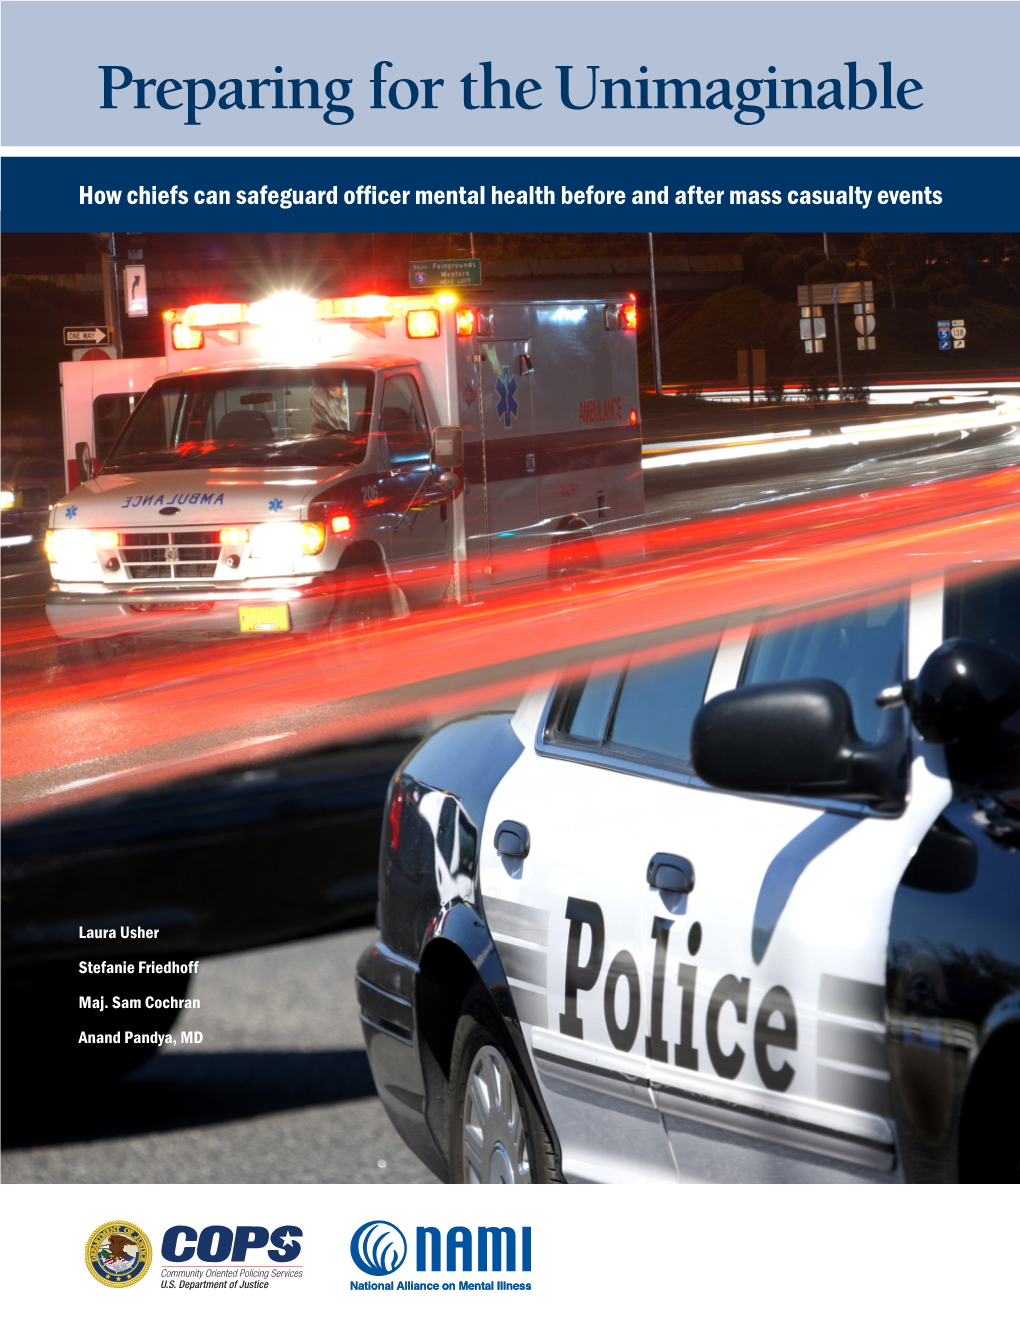 How Chiefs Can Safeguard Officer Mental Health Before and After Mass Casualty Events